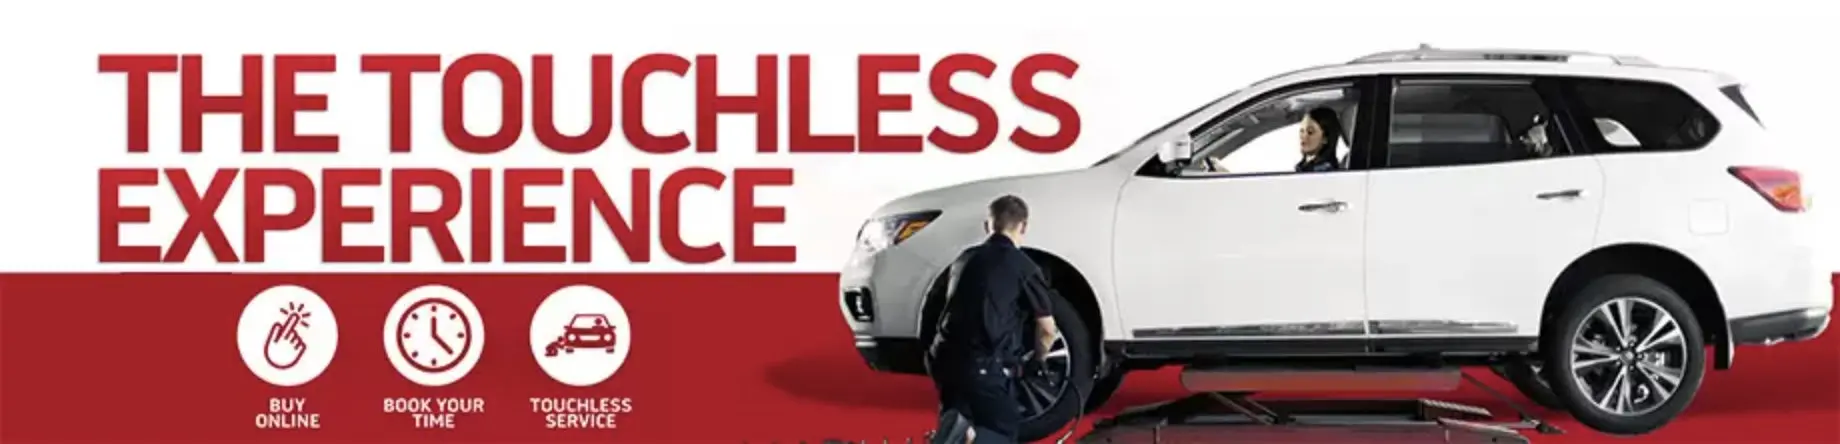 An ad for the Touchless Experience from Discount Tire Co. 